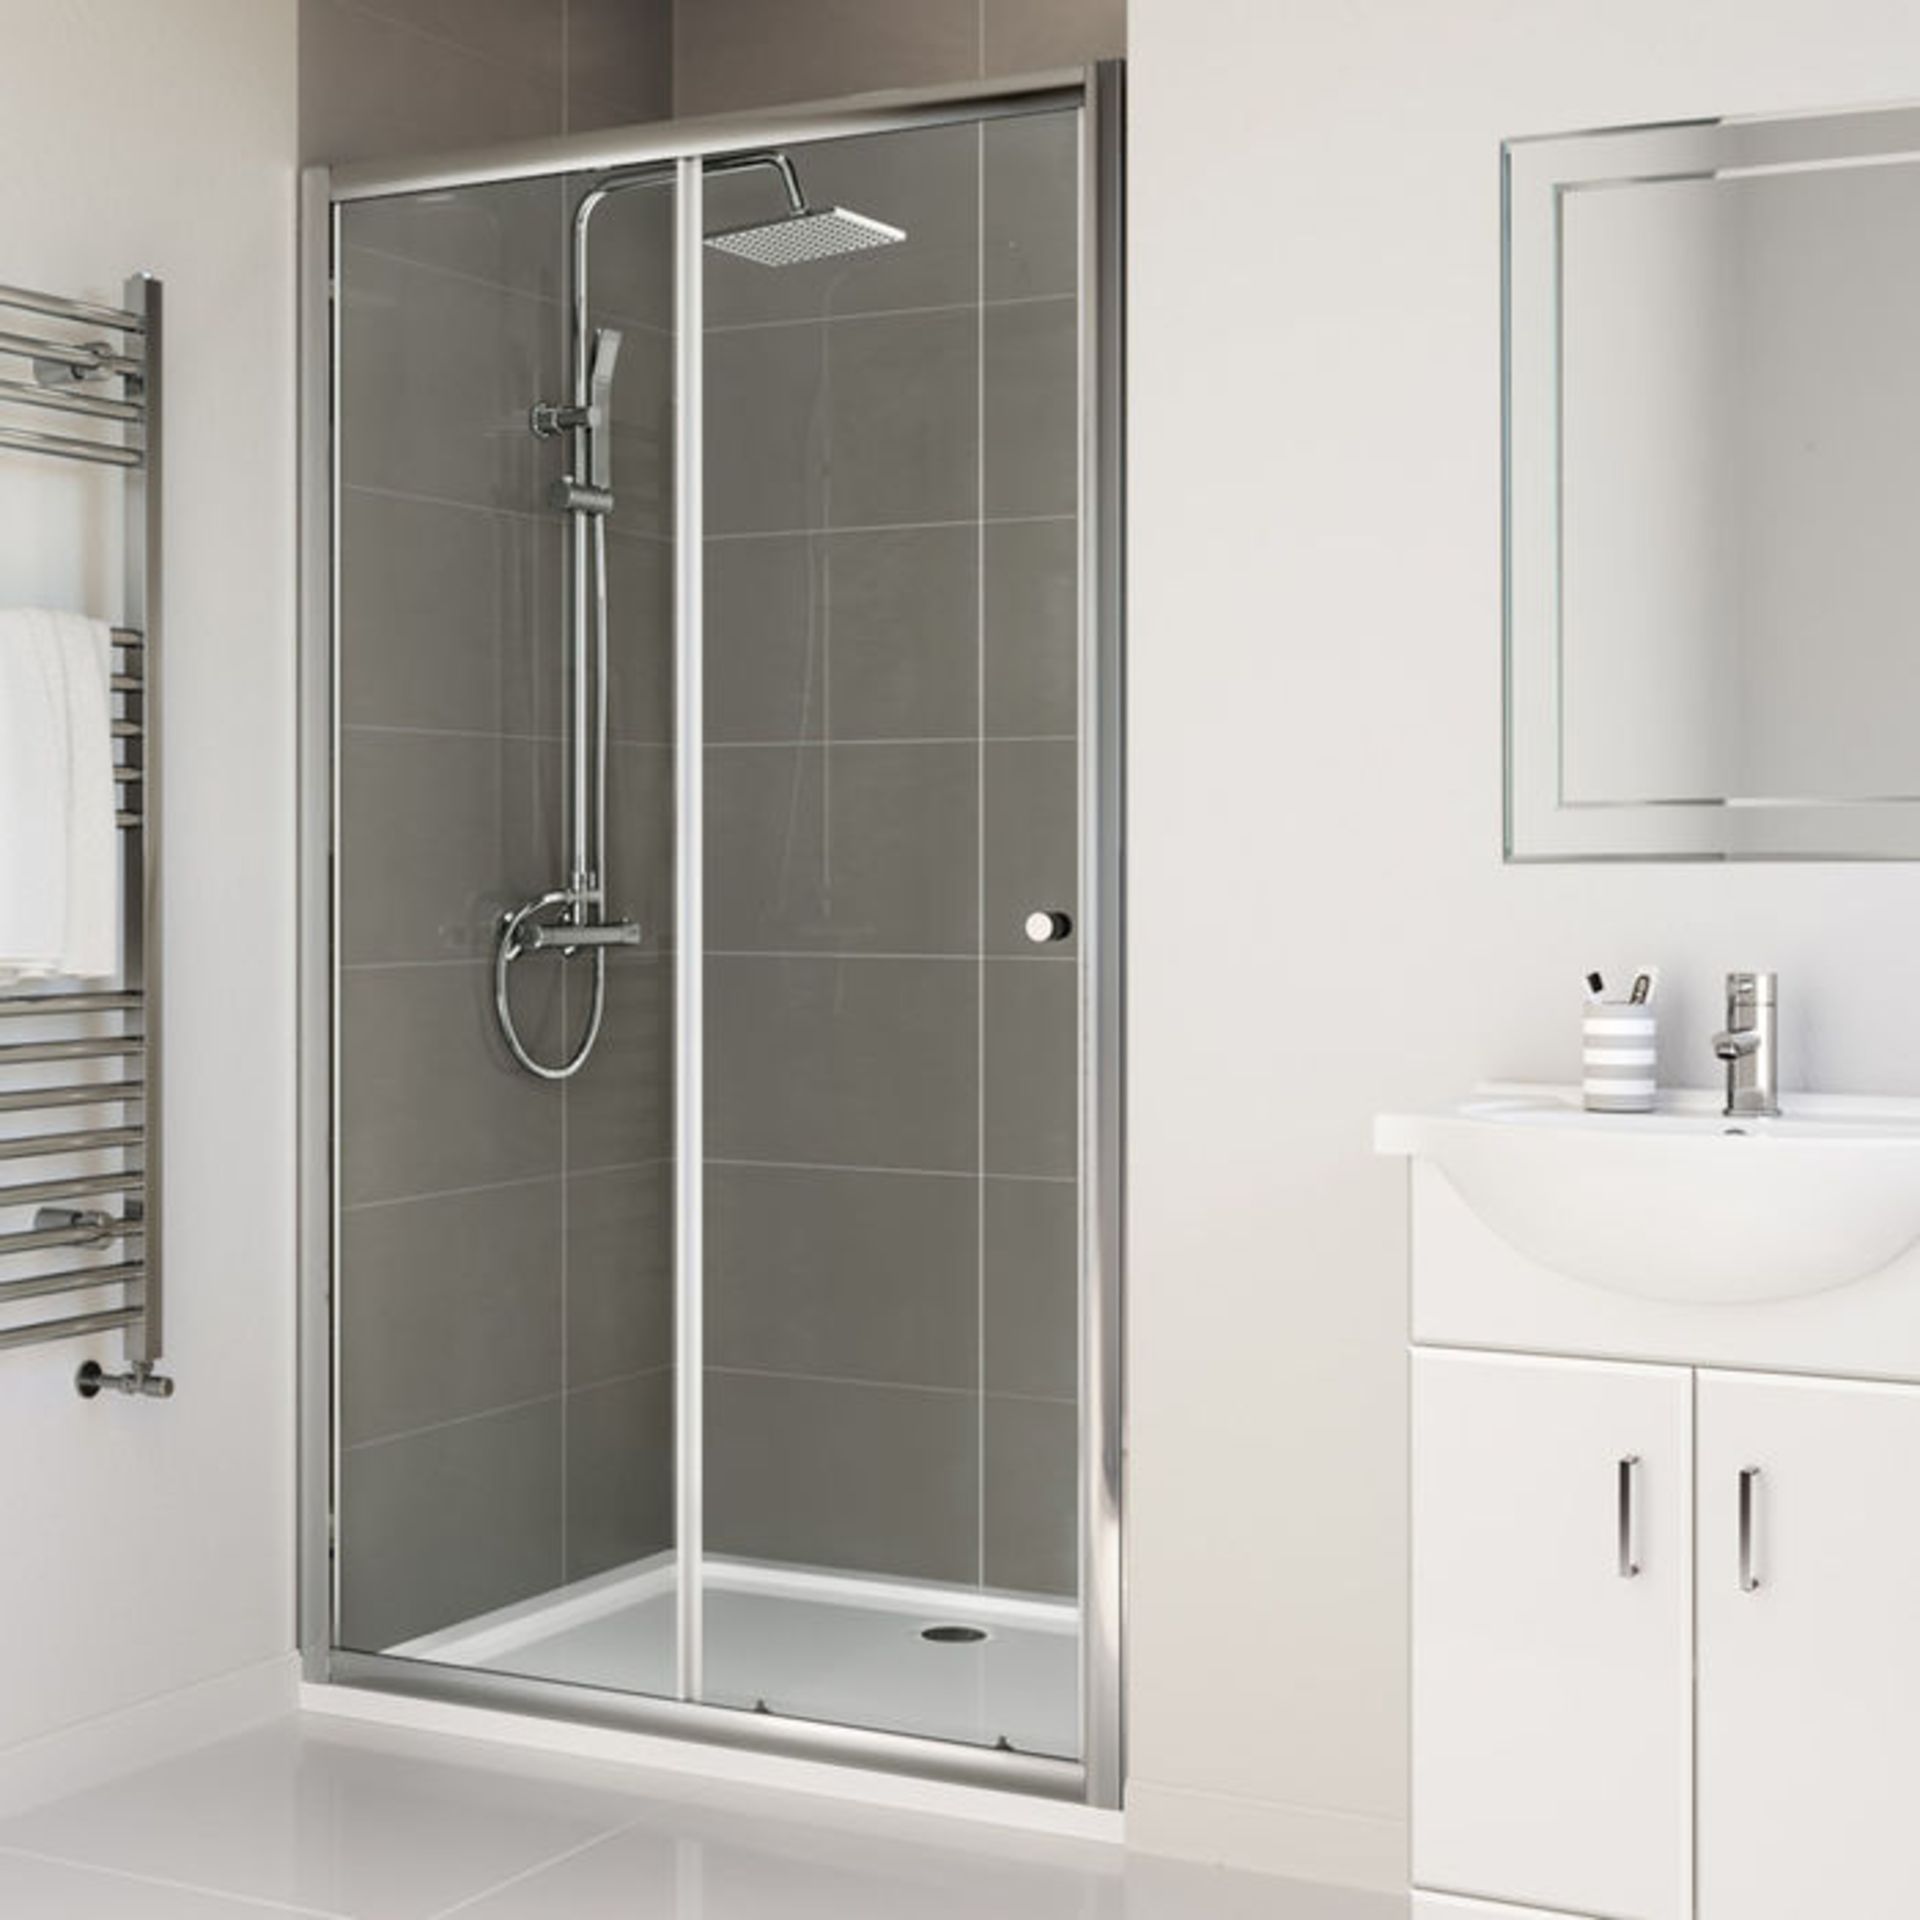 (PO75) 1000mm - Elements Sliding Shower Door. RRP £299.99.4mm Safety GlassFully waterproof tested